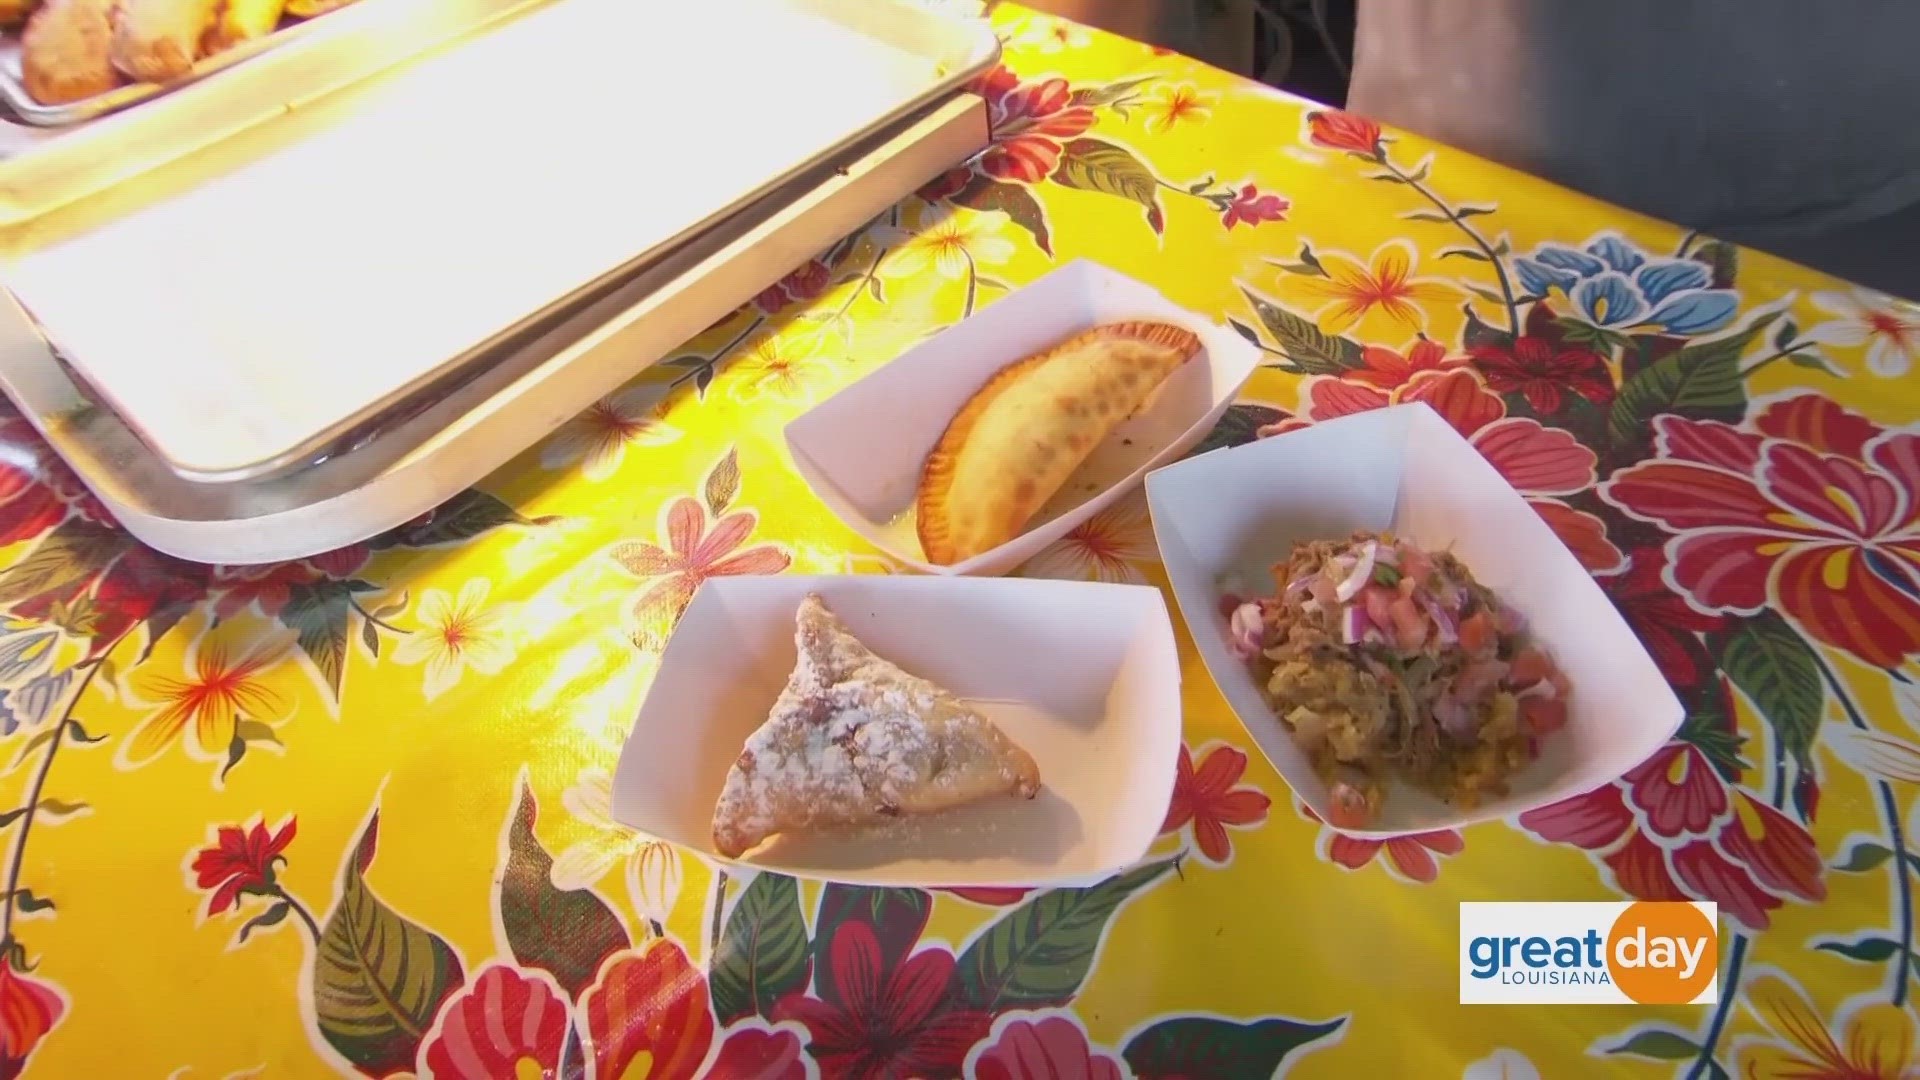 We headed out to Jazz Fest to get a taste of some of the new vendors serving up delicious dishes this weekend.